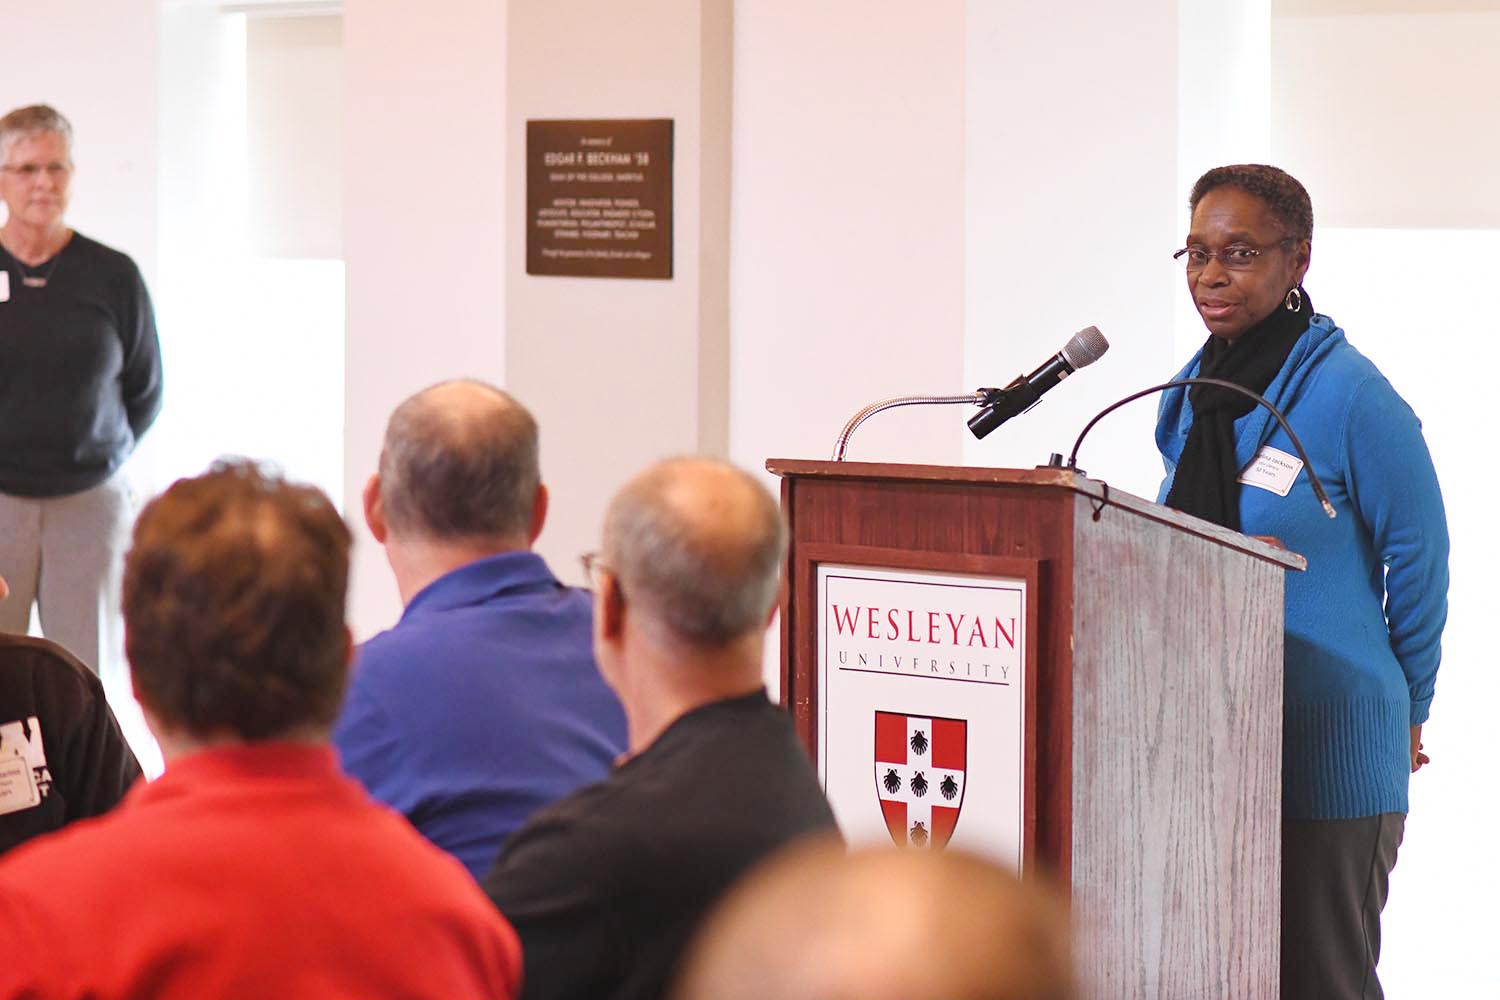 Pearlina Jackson, library assistant for Olin Library celebrated 50 years at Wesleyan. She presented a short speech about her time at Wesleyan during the luncheon.